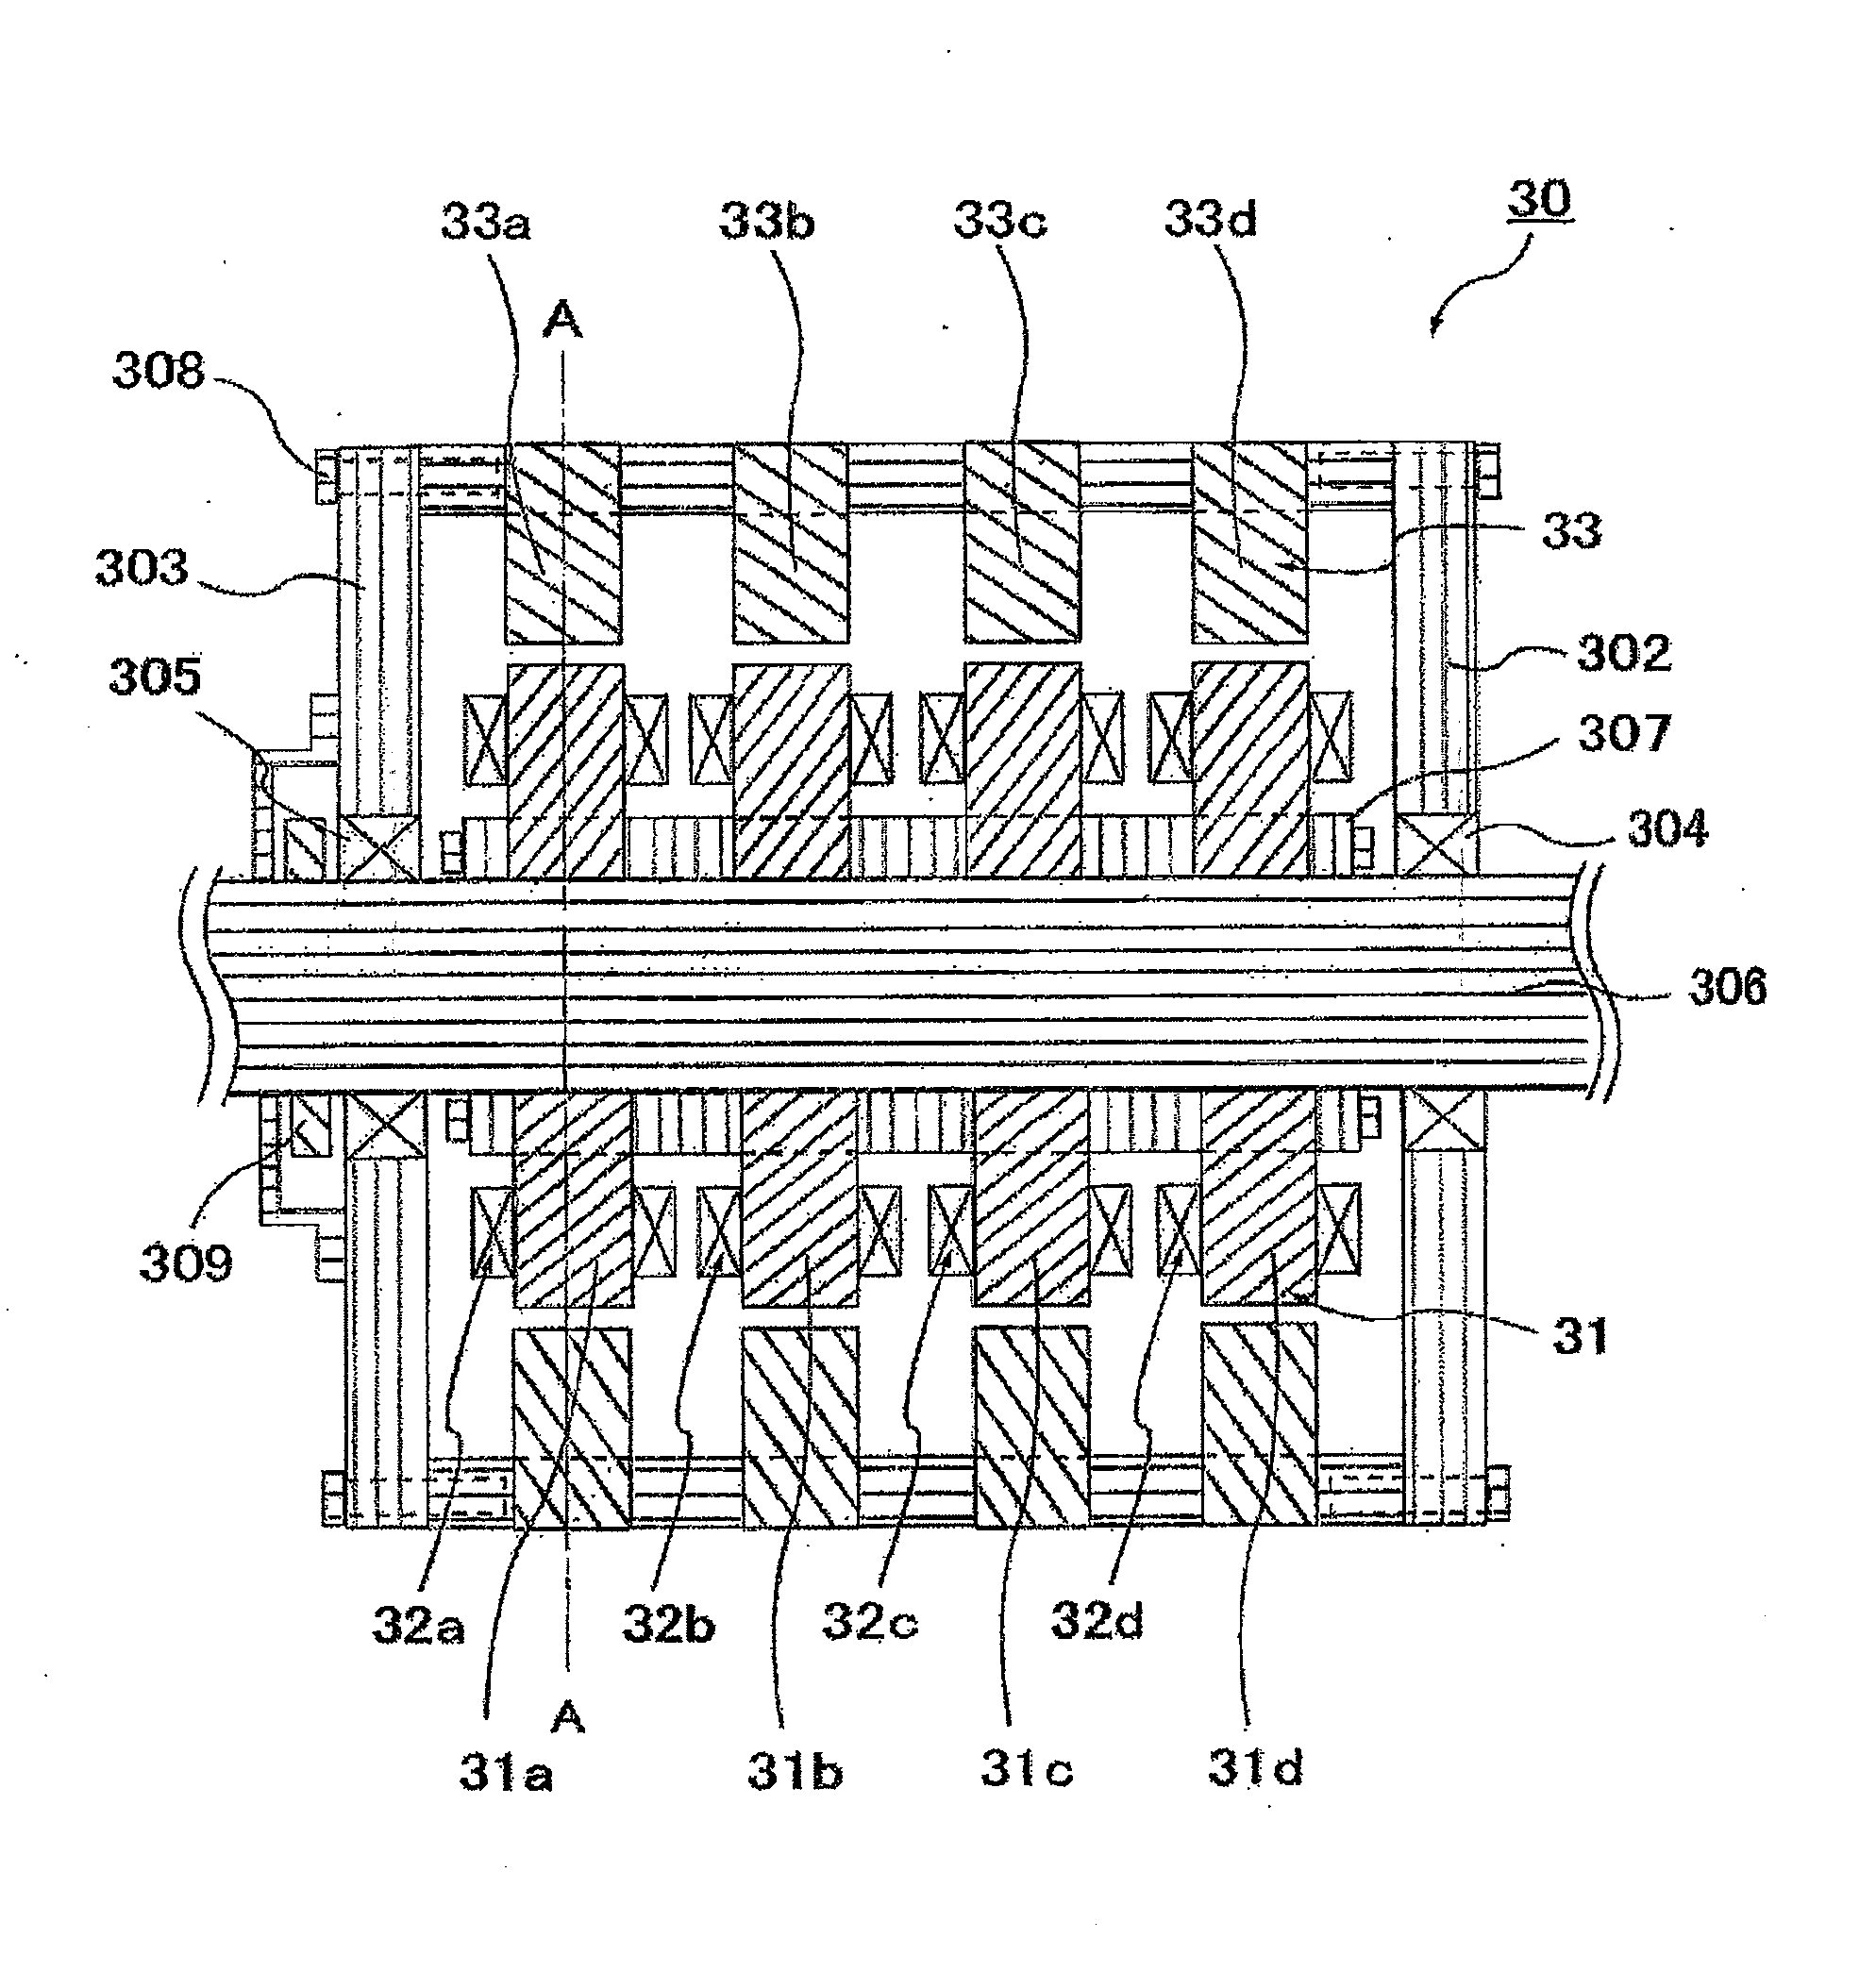 Switched Reluctance Motor and Switched Reluctance Motor Drive System